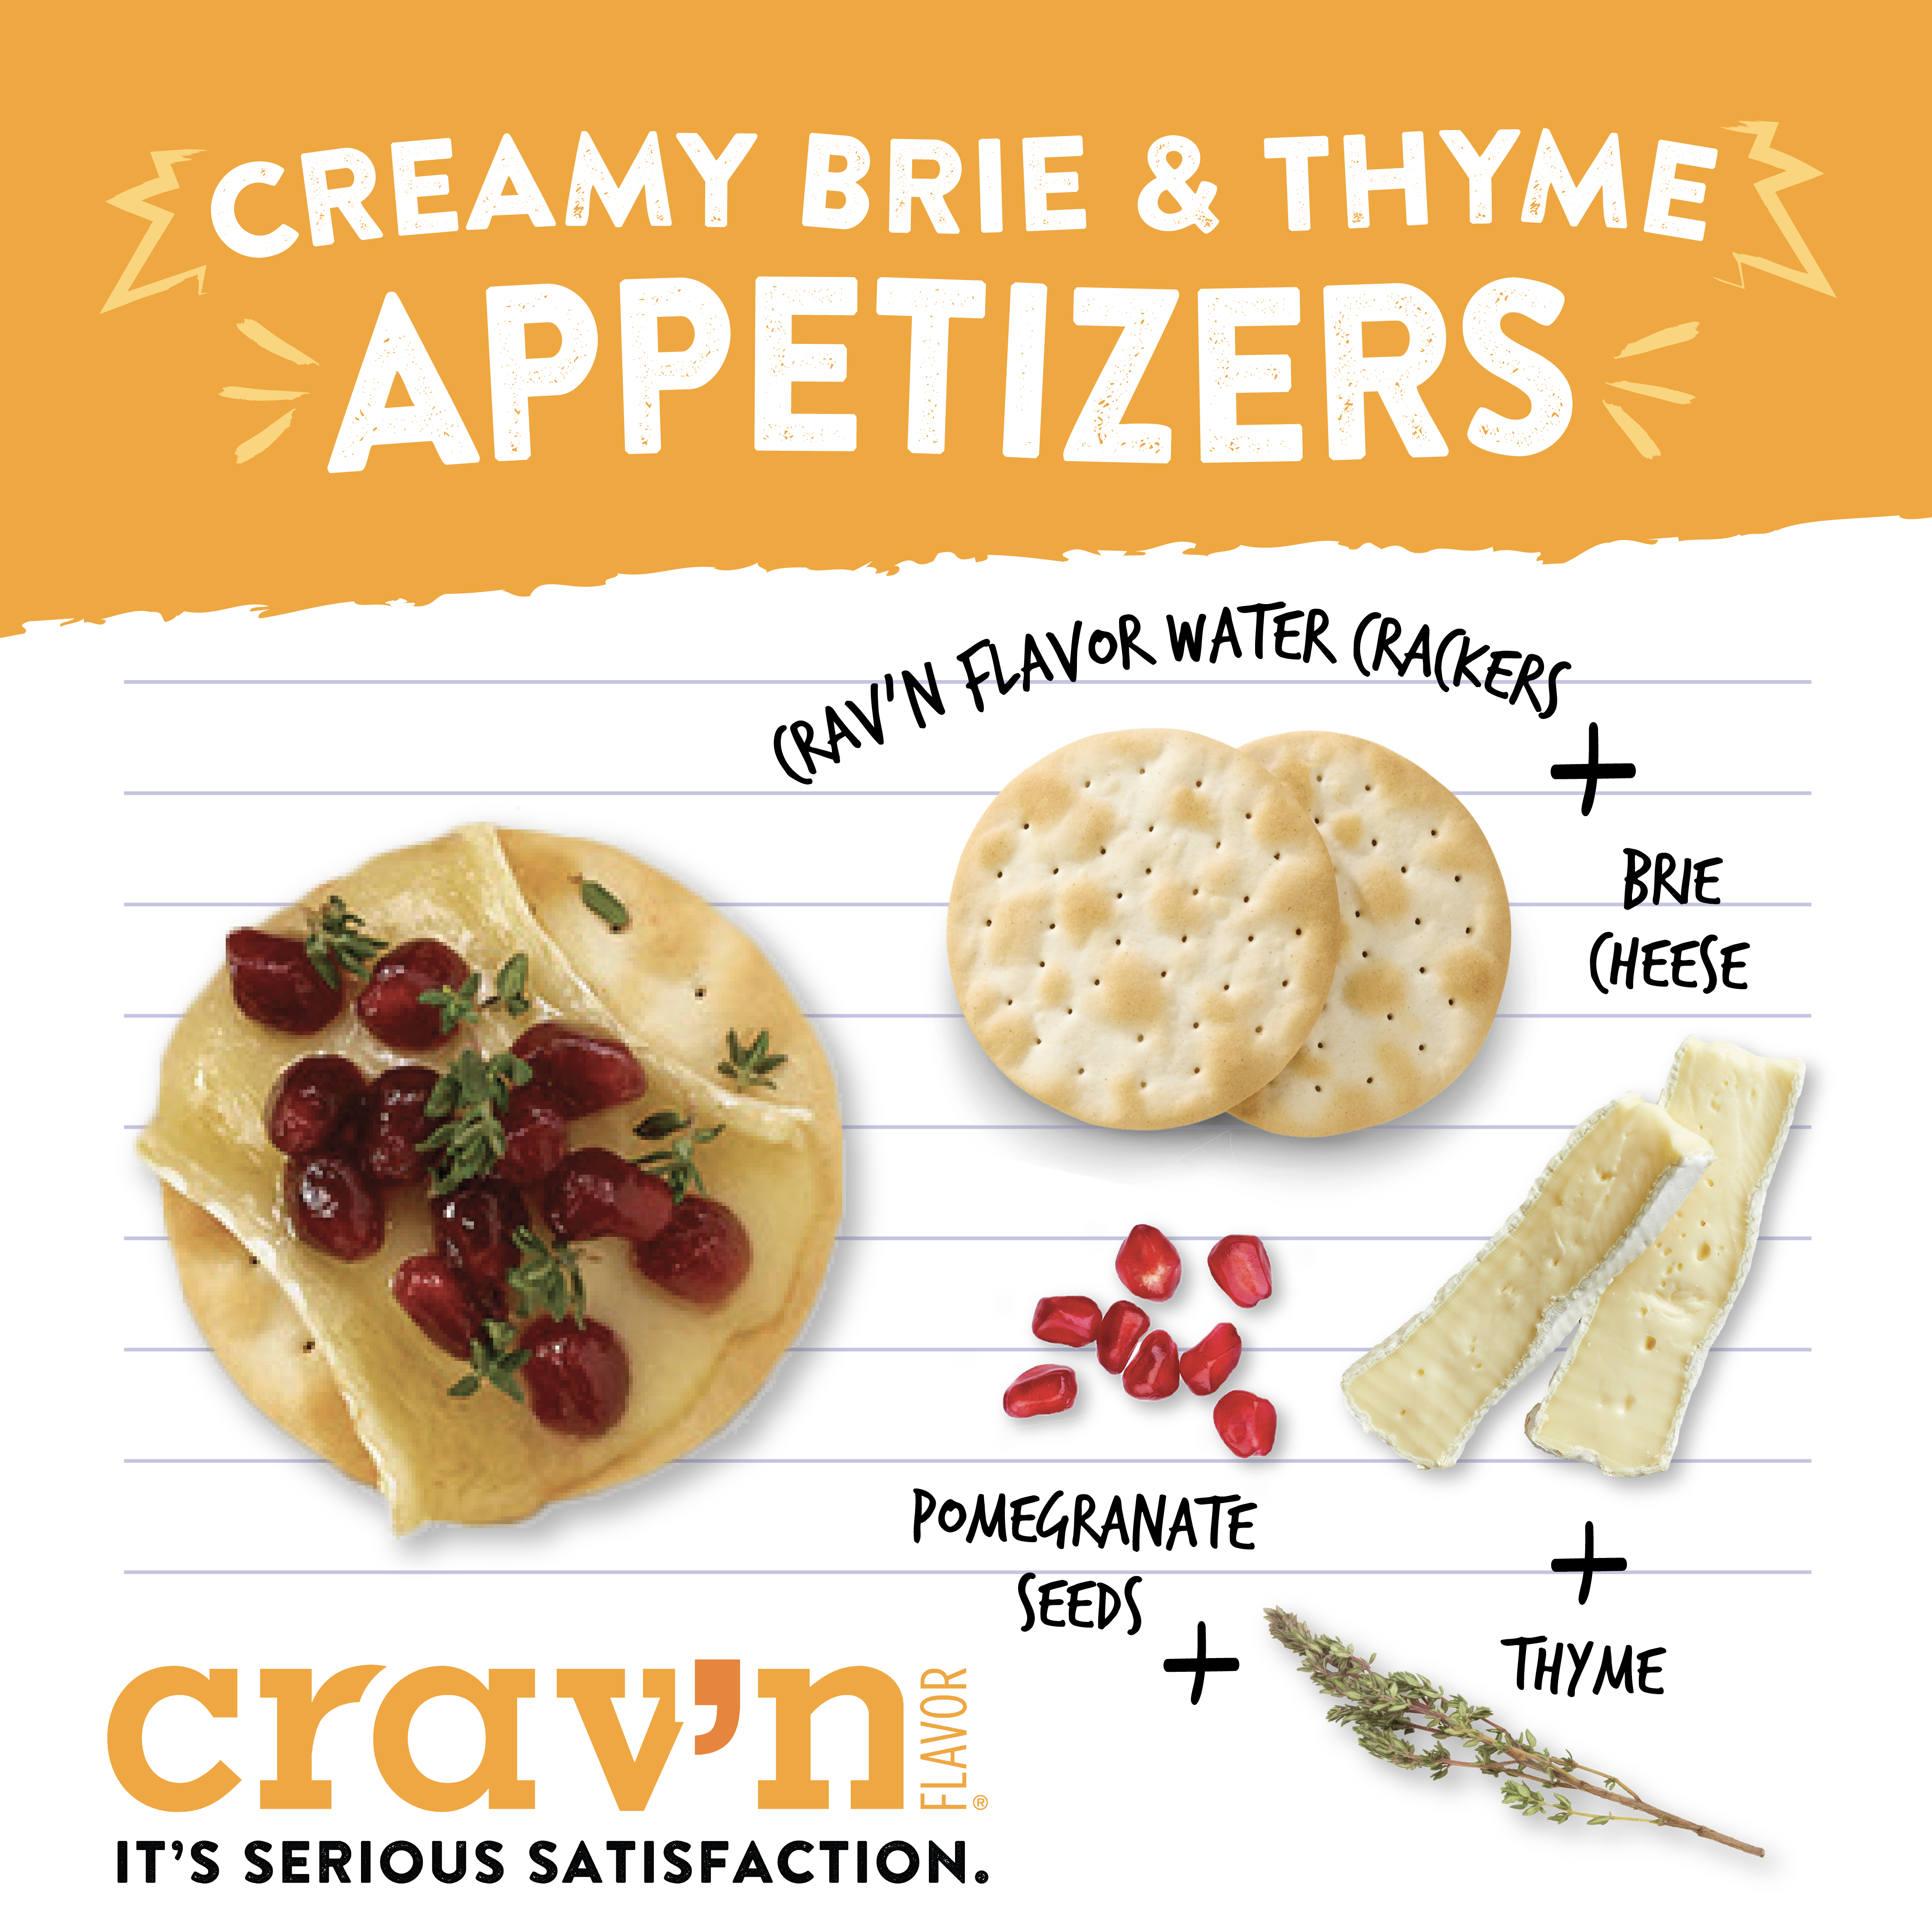 Creamy Brie & Thyme Appetizers